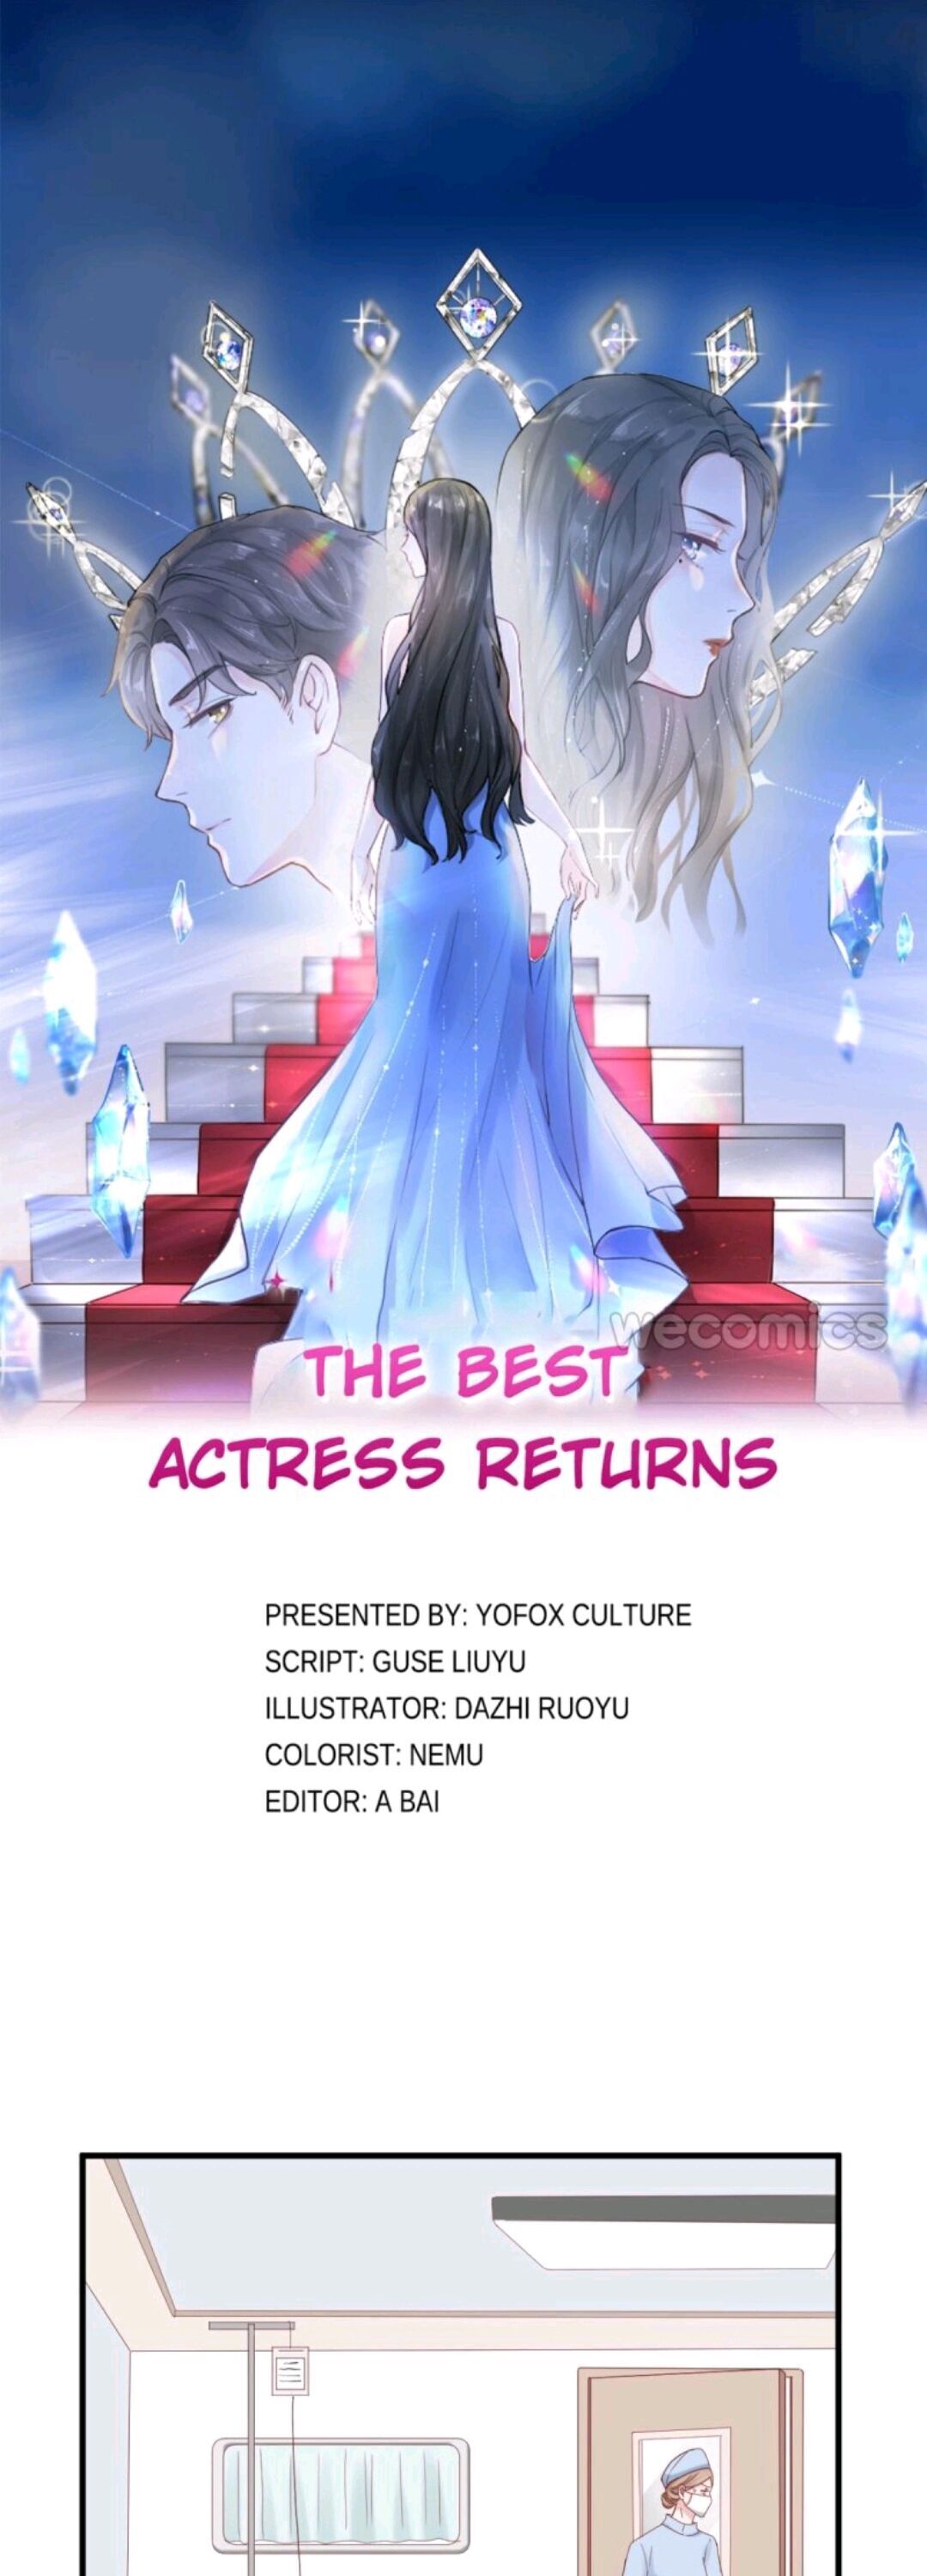 The Best Actress Returns - Page 1